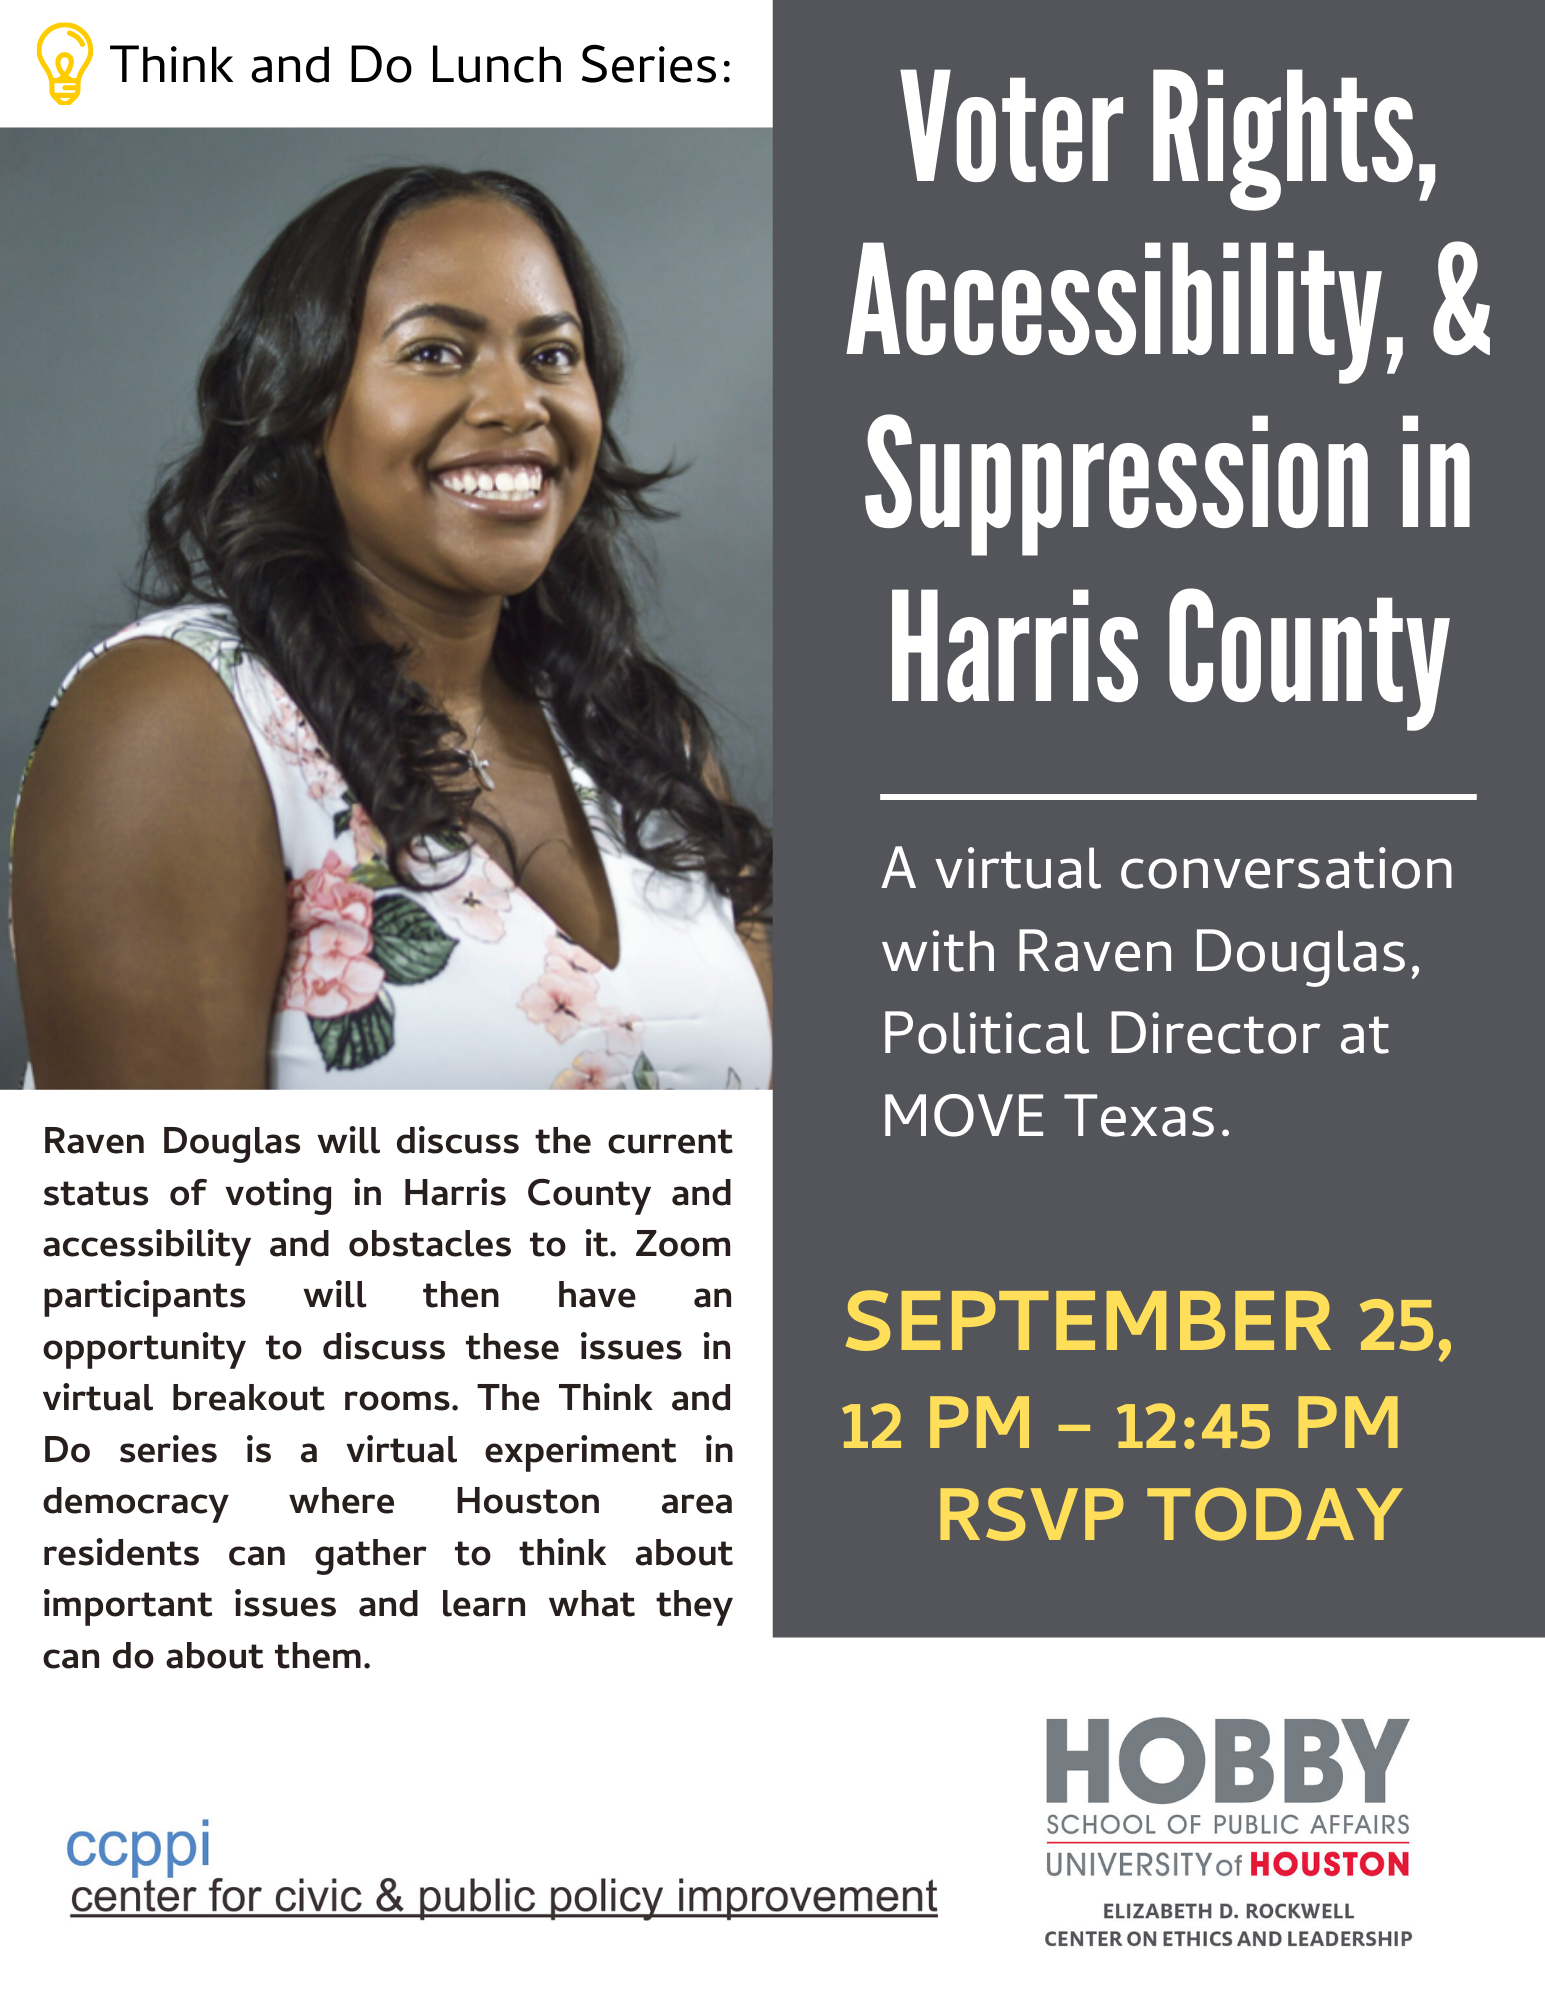 event flyer for voter rights, accessibility, and suppression in Harris County with speaker Raven Douglas